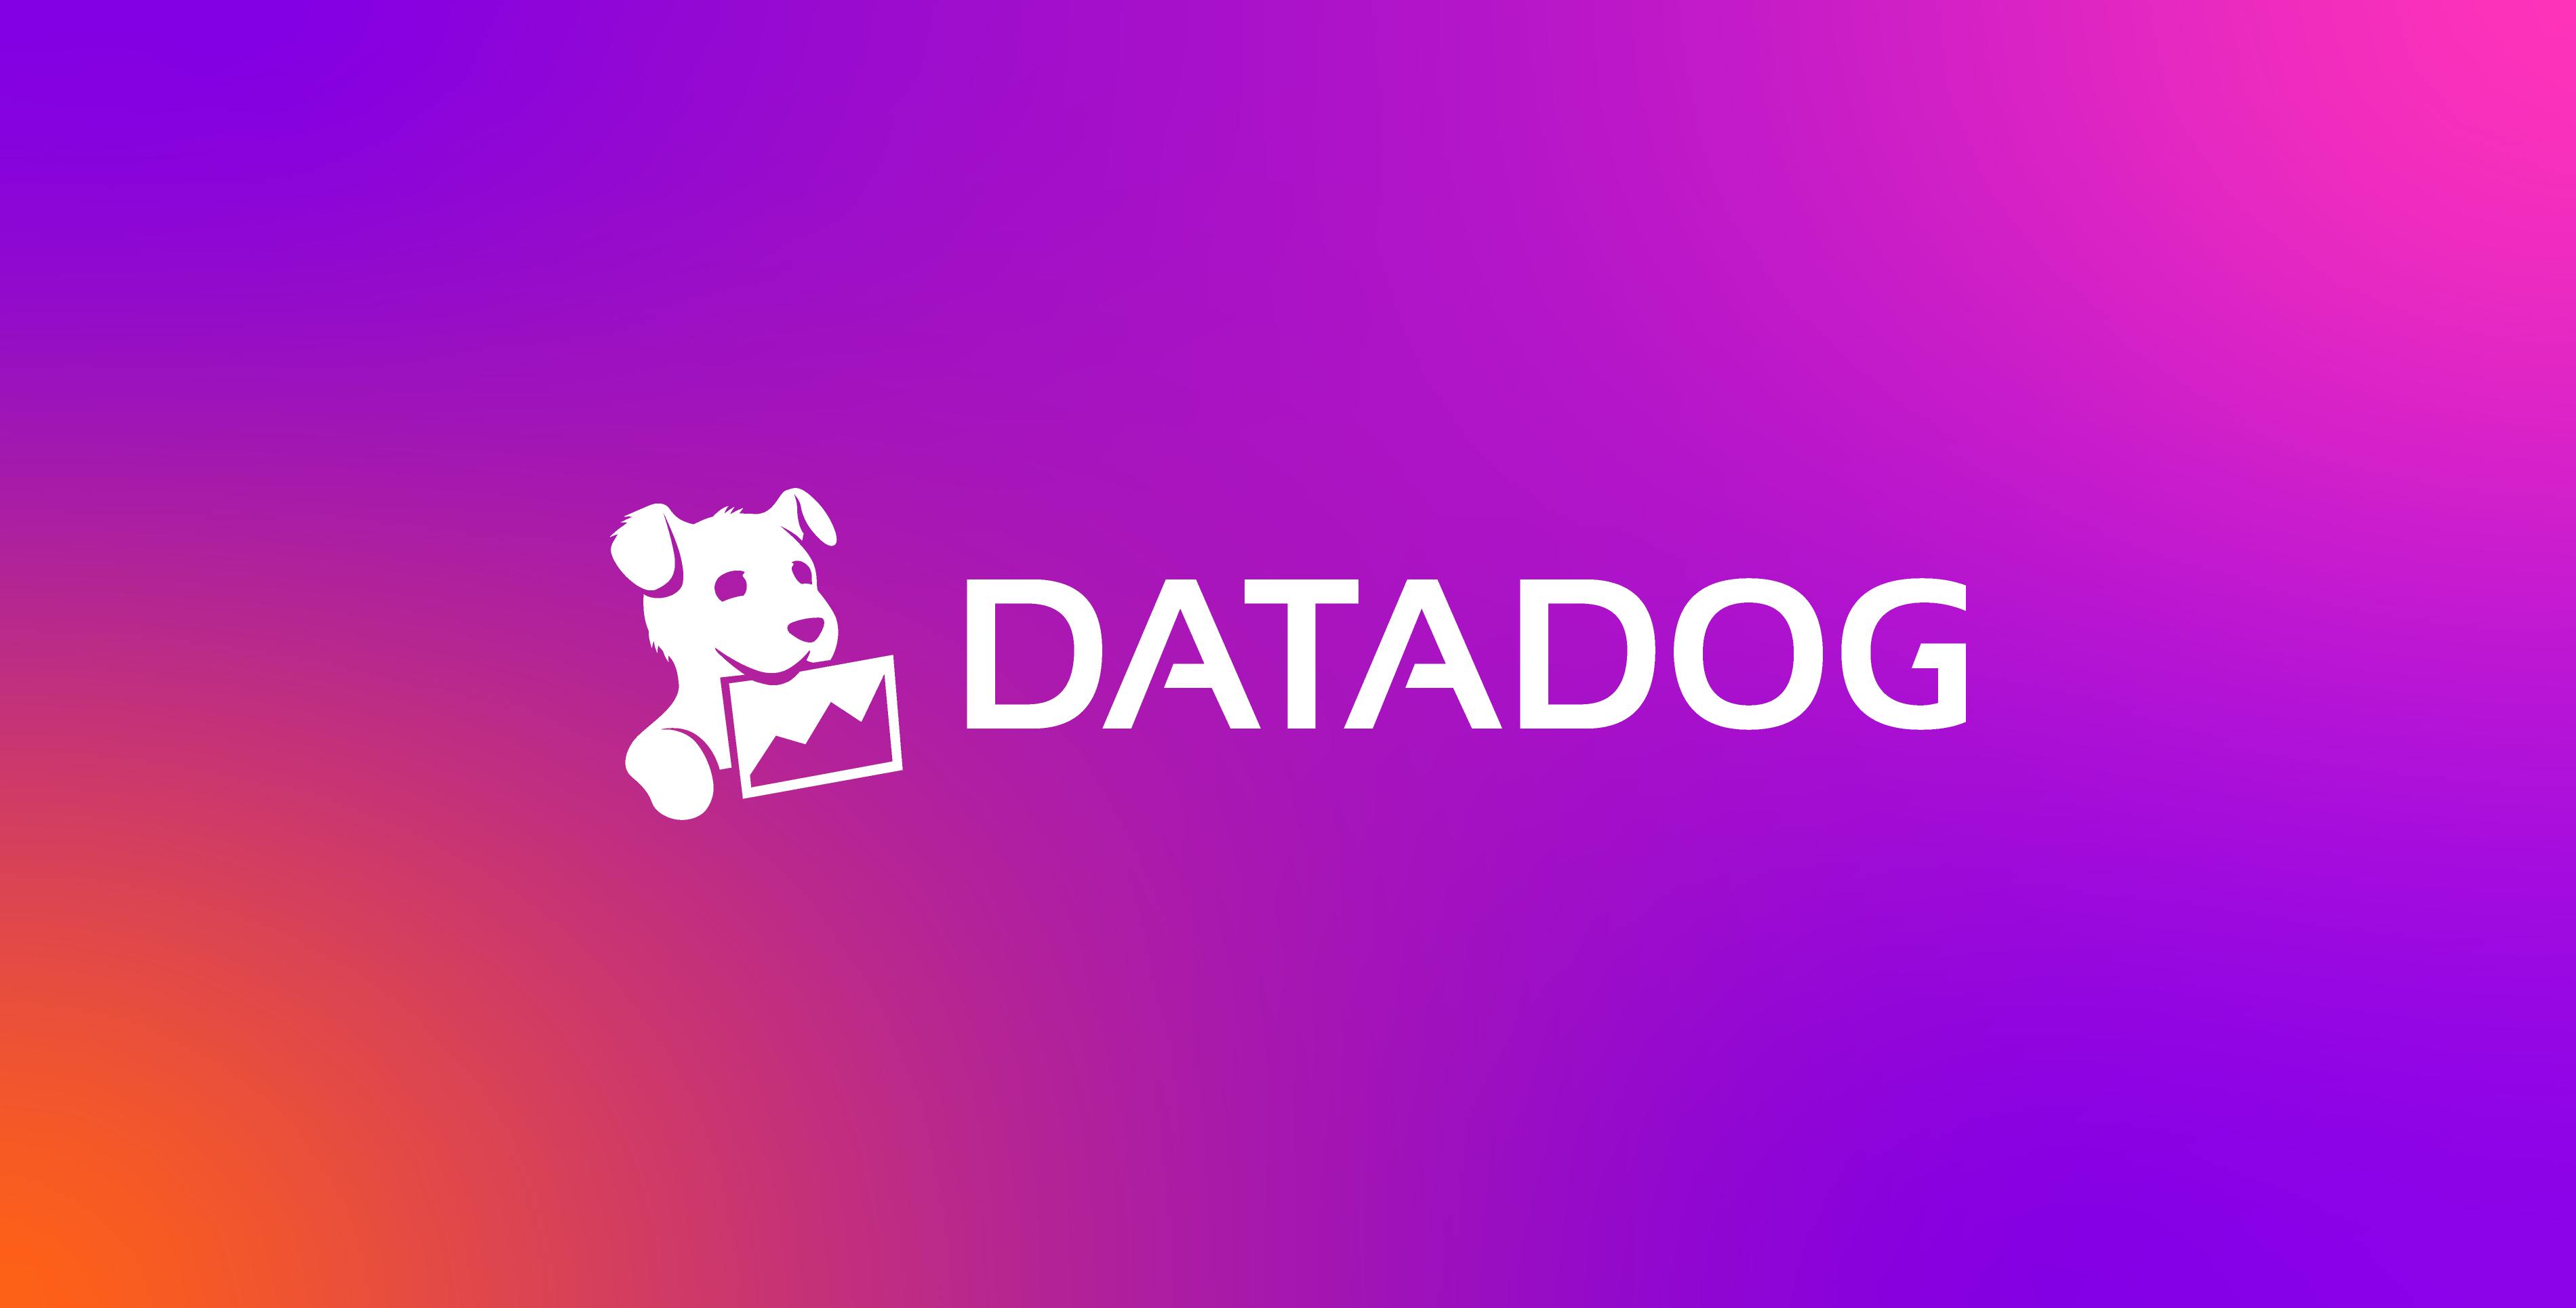 Learn how the Log4Shell vulnerability works, how to detect it, and how Datadog can help you secure your systems.?w=428&h=206&fit=crop